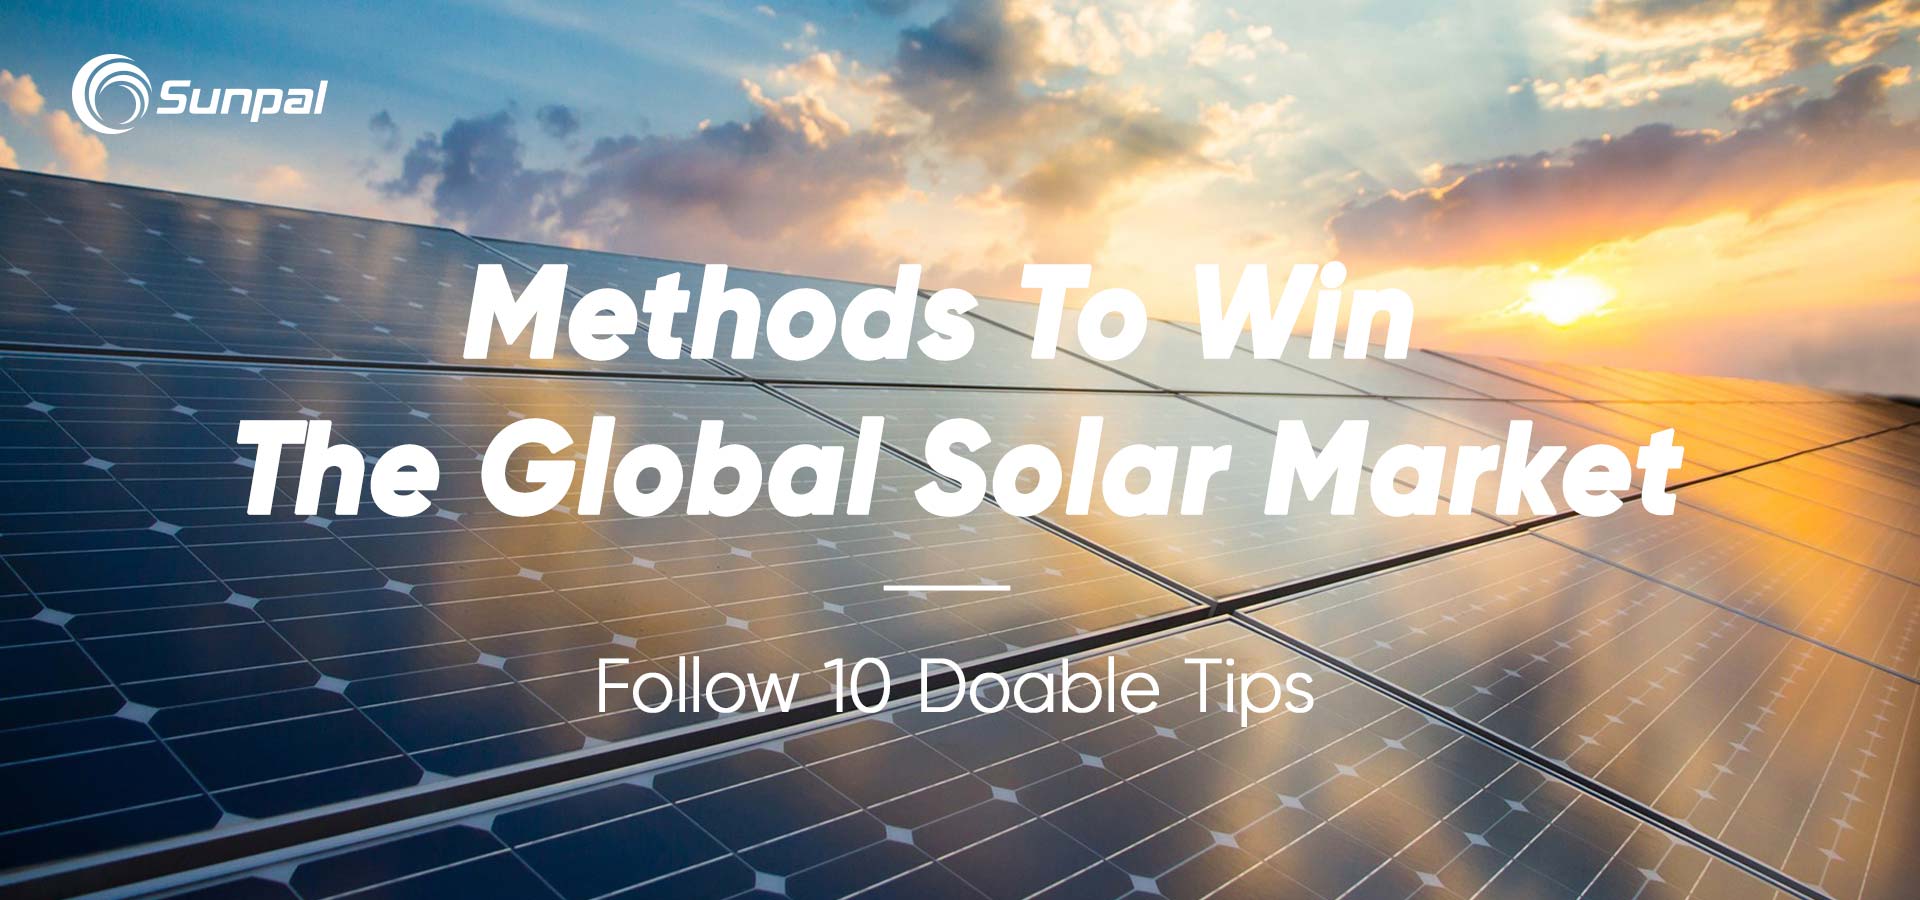 How To Win The Global Solar Market - Master 10 Proven Tips